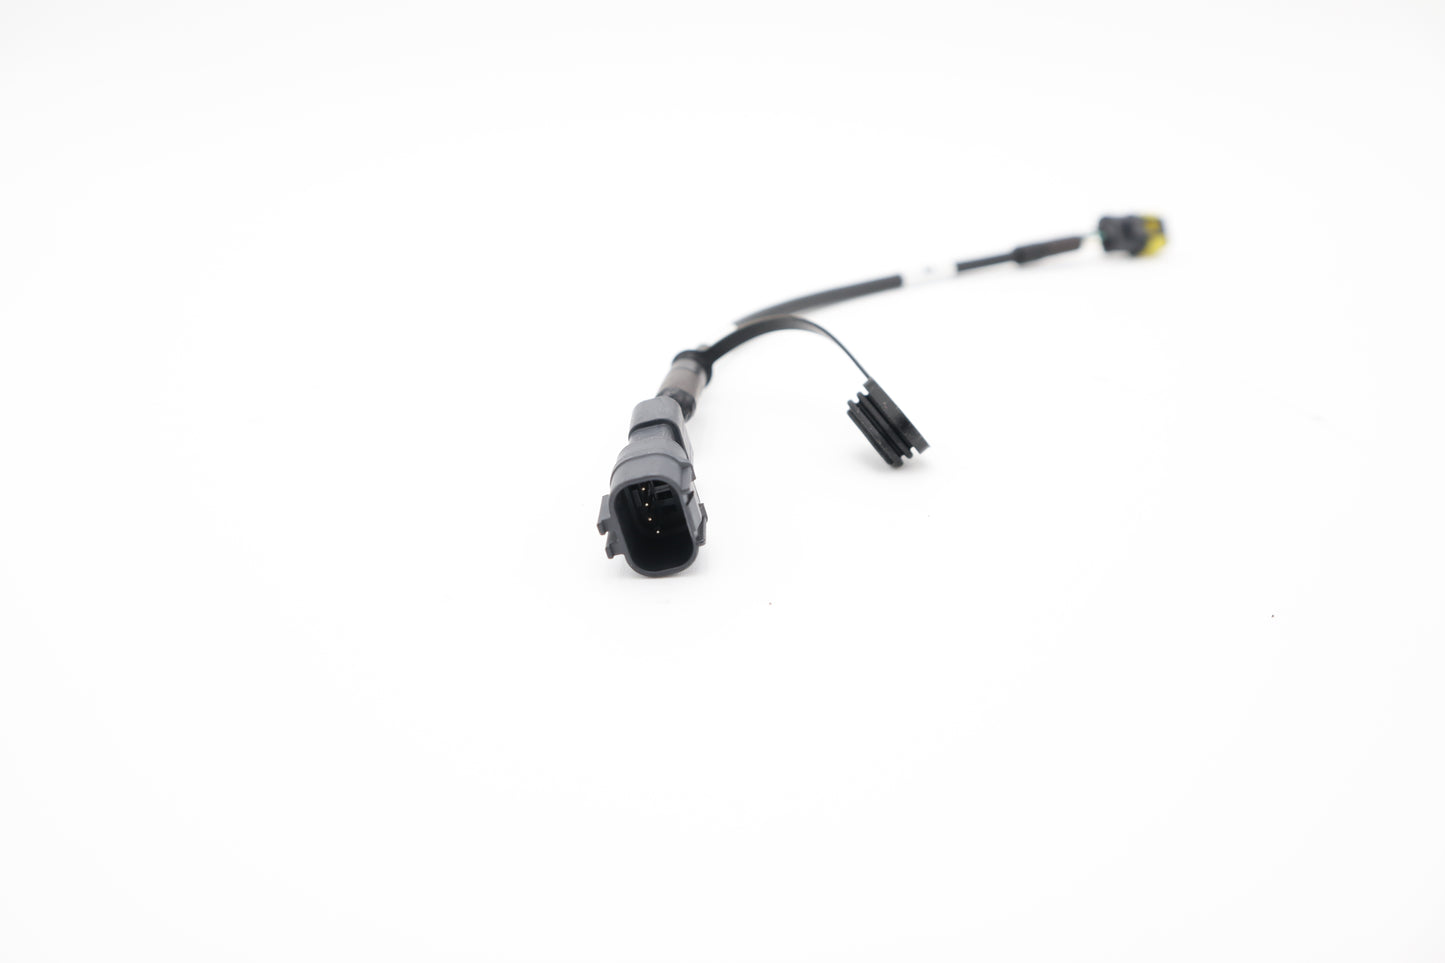 DJI Agras T30 Spray Tank Liquid Level Meter Adapter Cable